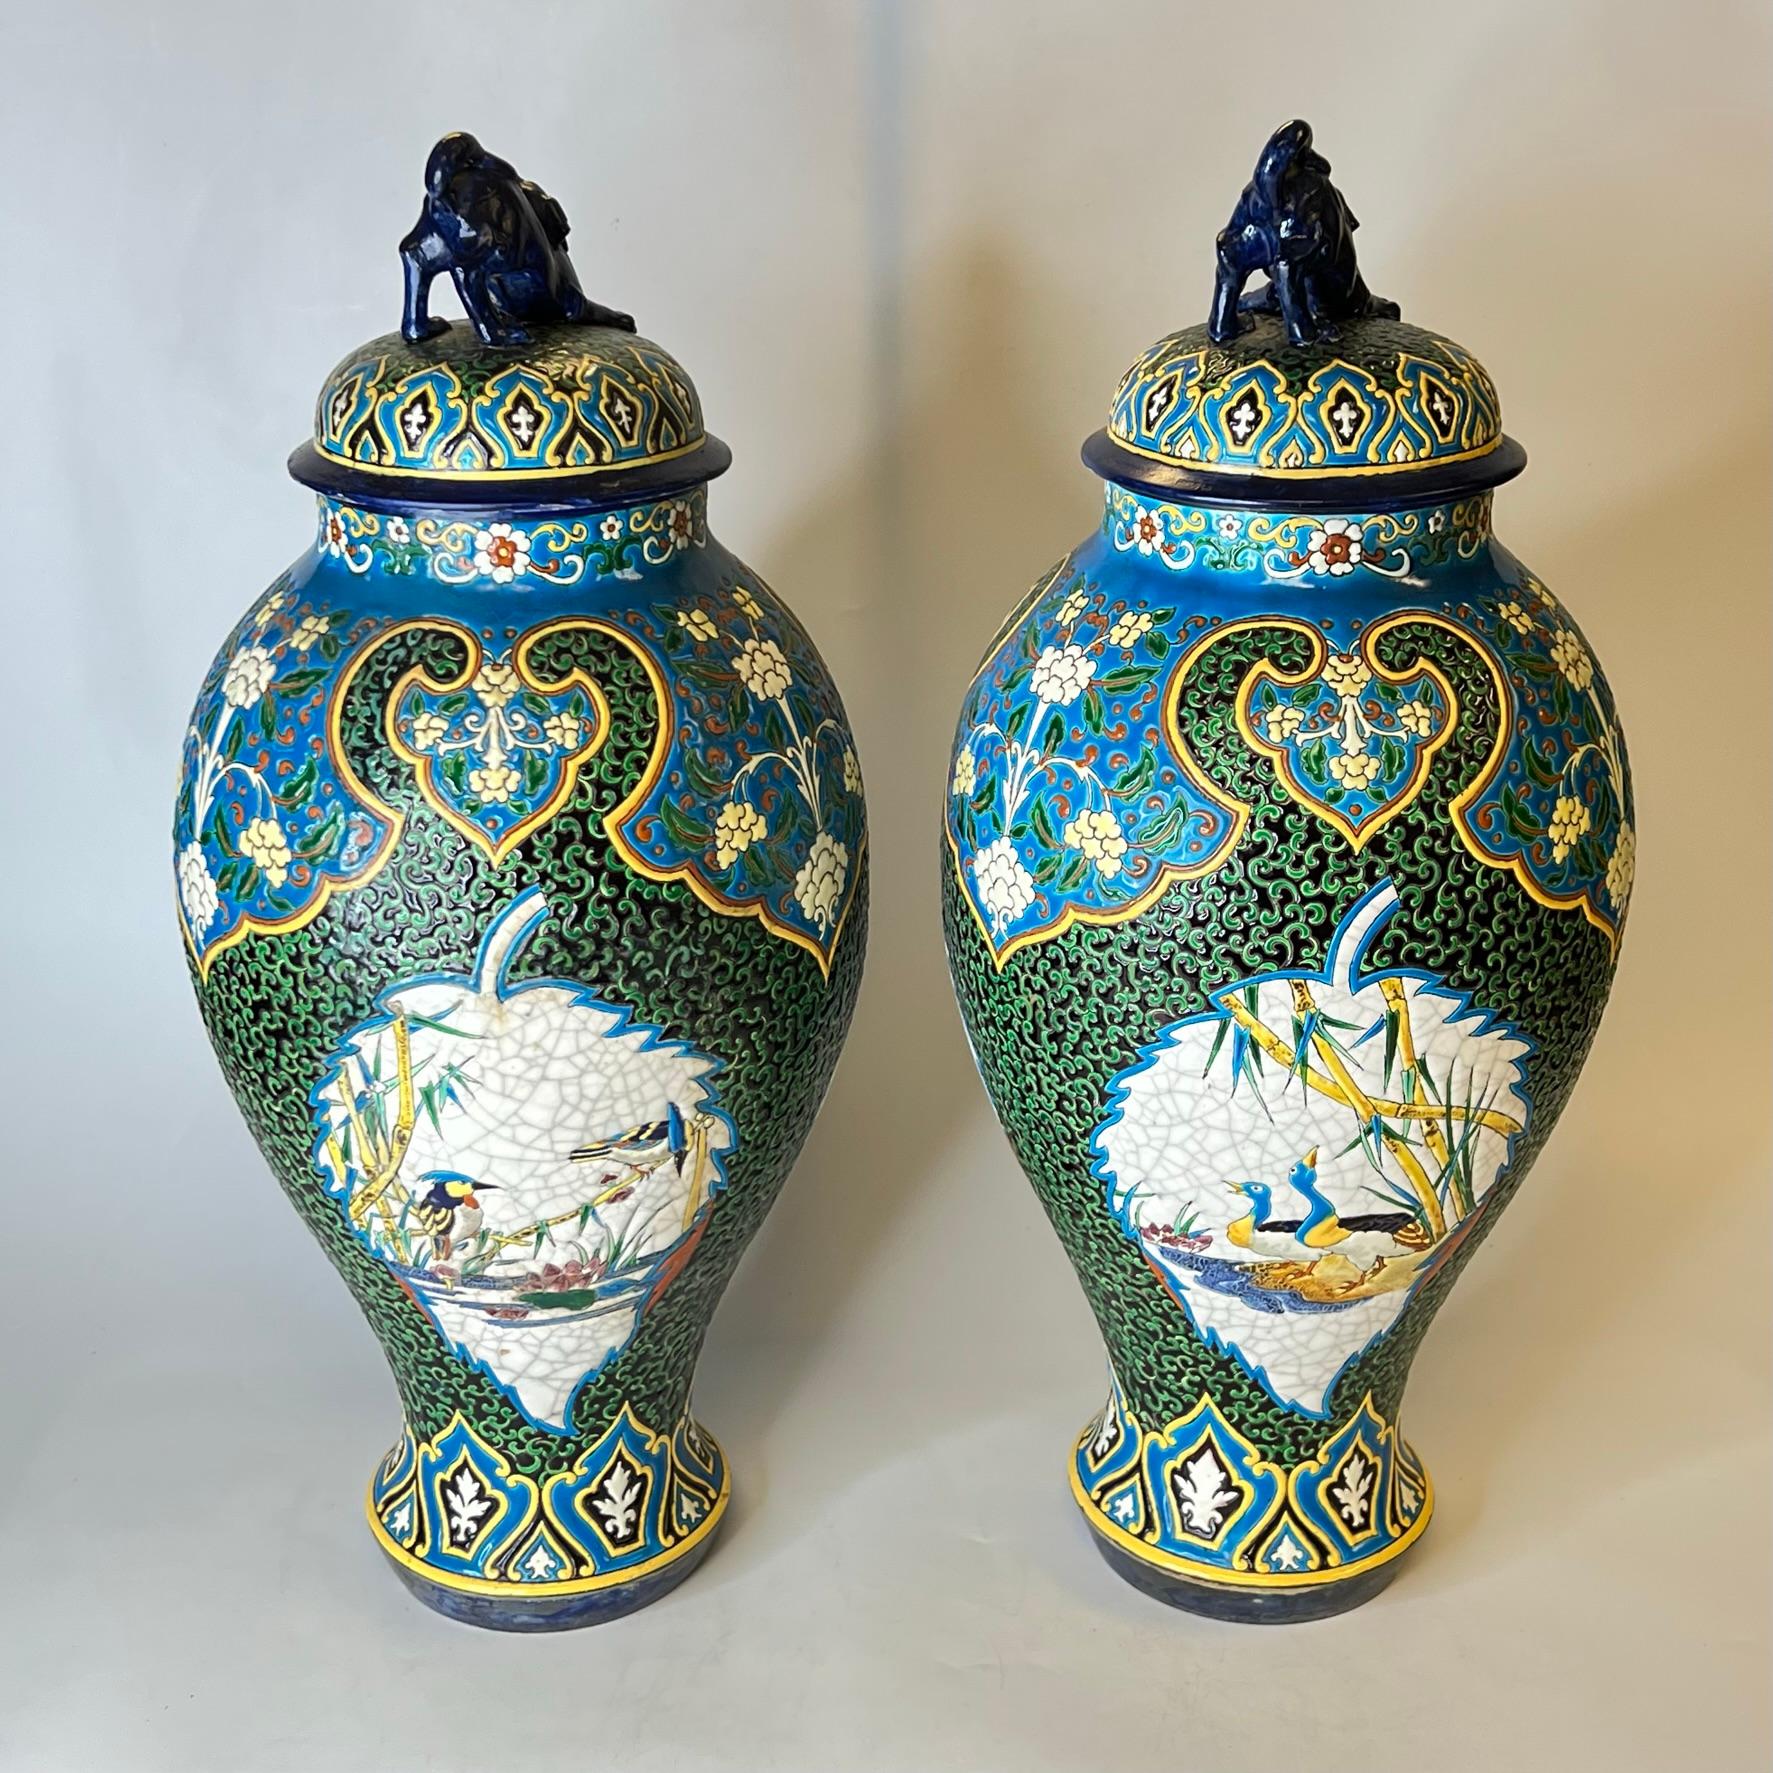 Enameled Pair 19th Century French Faience Vases by J. Vieillard & Co with Islamic Motifs